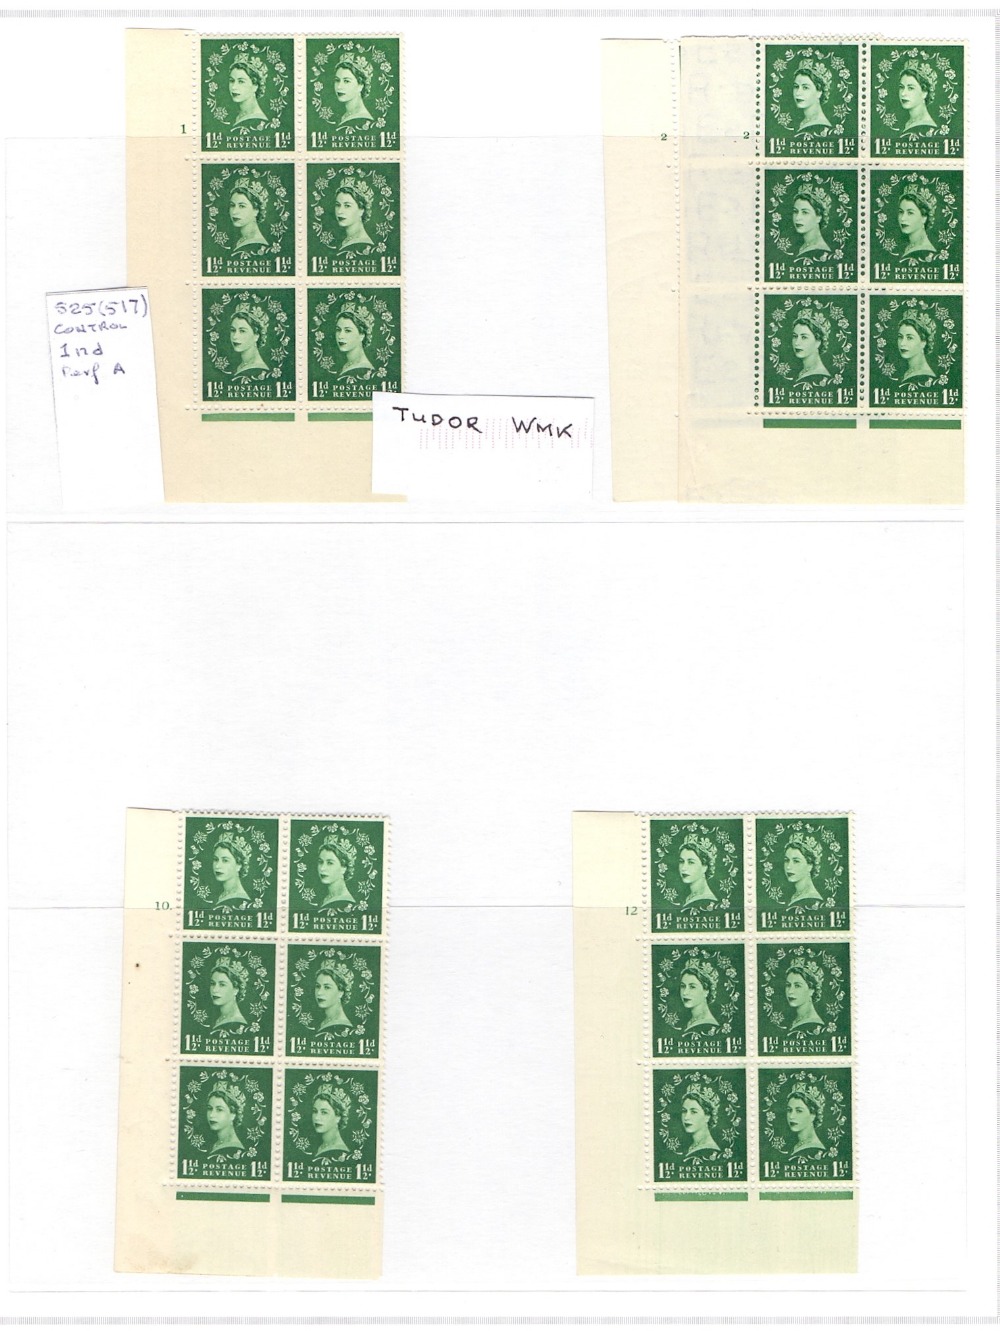 GREAT BRITAIN STAMPS : Wilding Collection, mint cylinder blocks, coils, singles, - Image 3 of 18